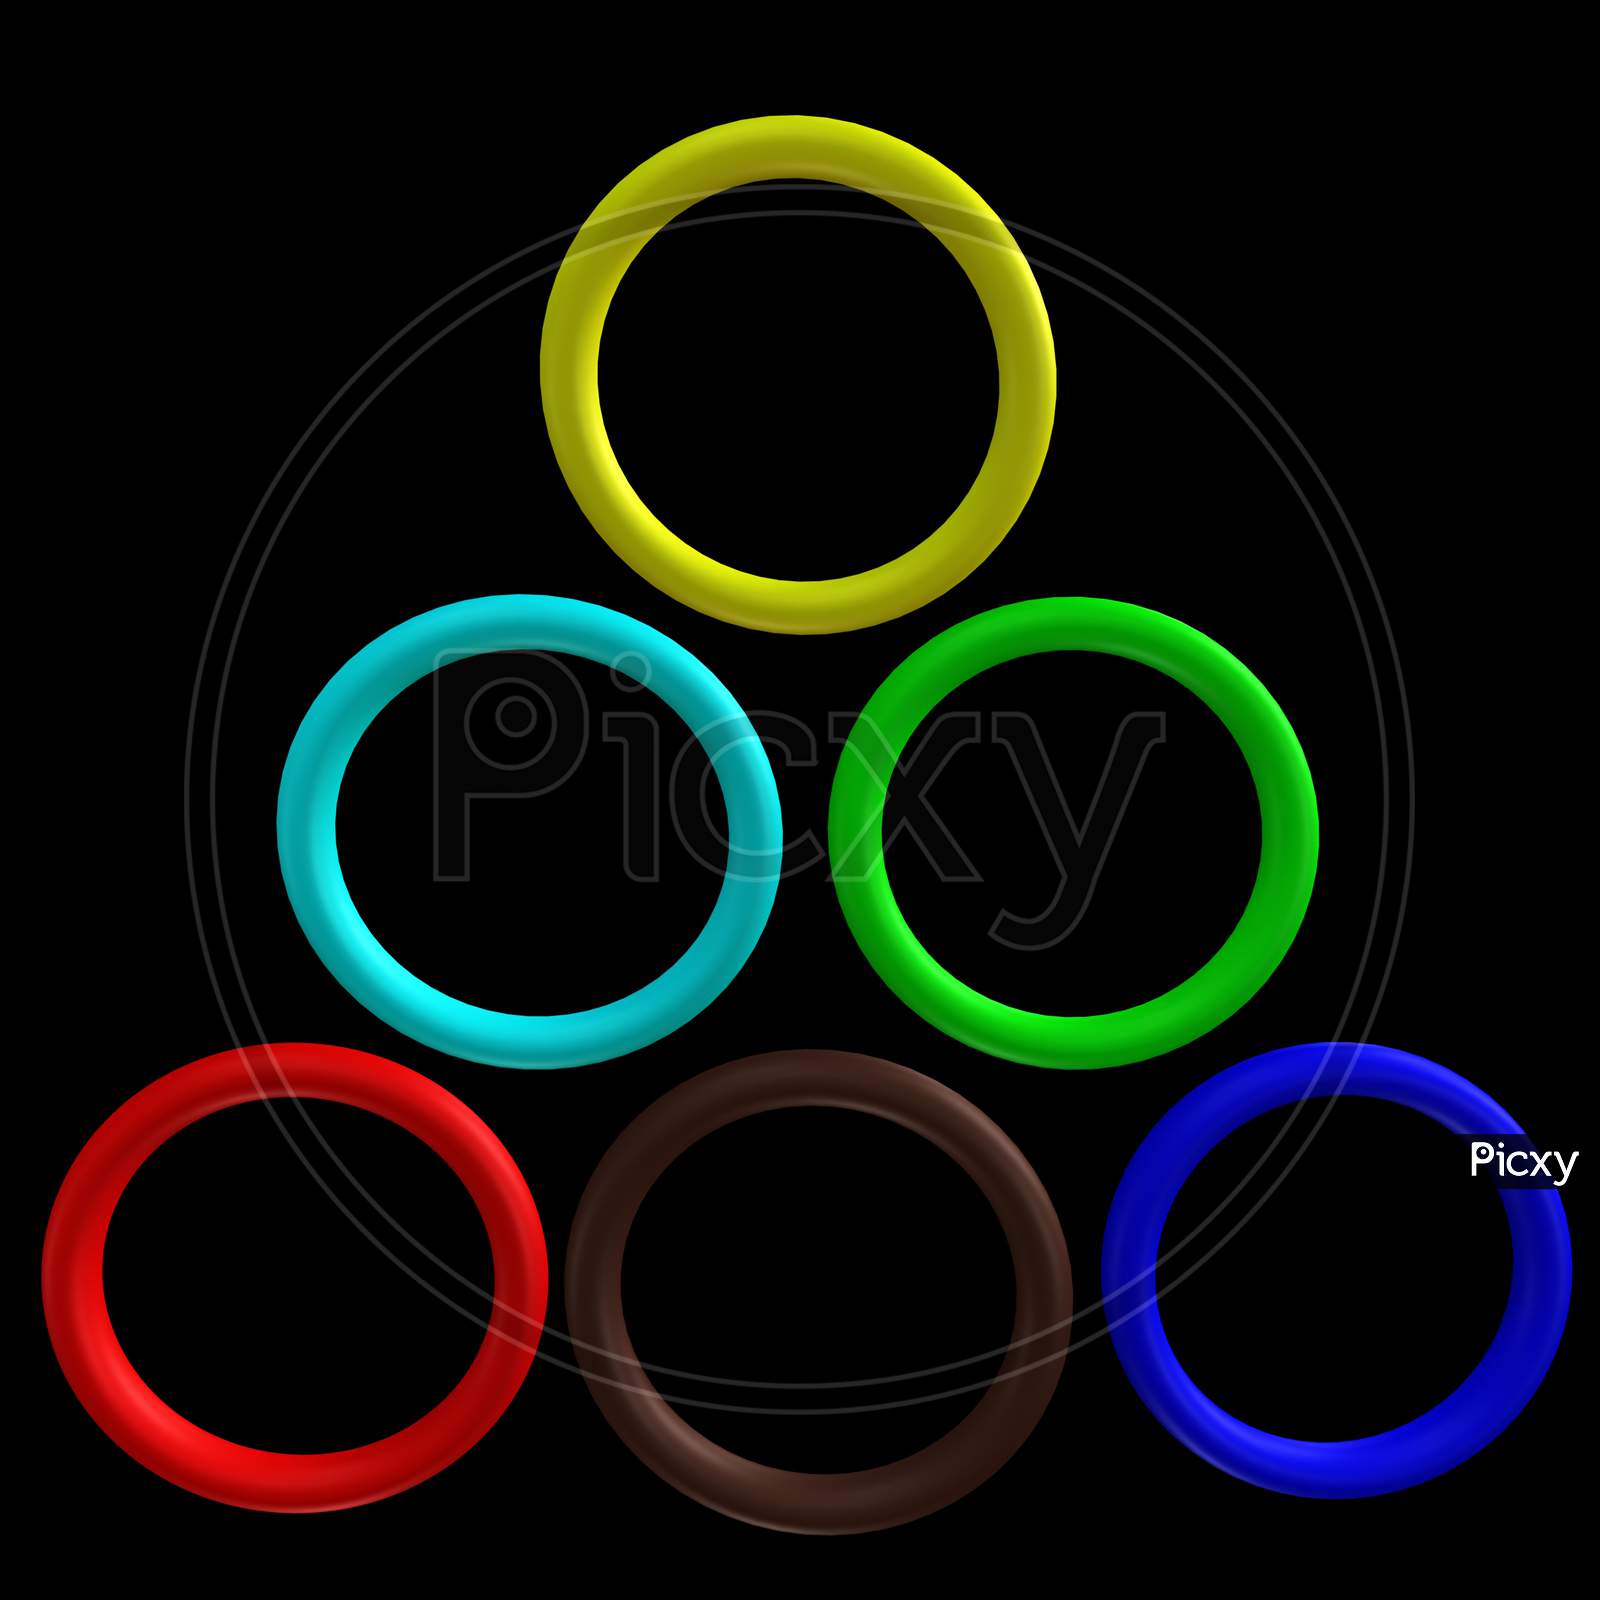 Coloufrul Rings Patterns On Isolated Black Background